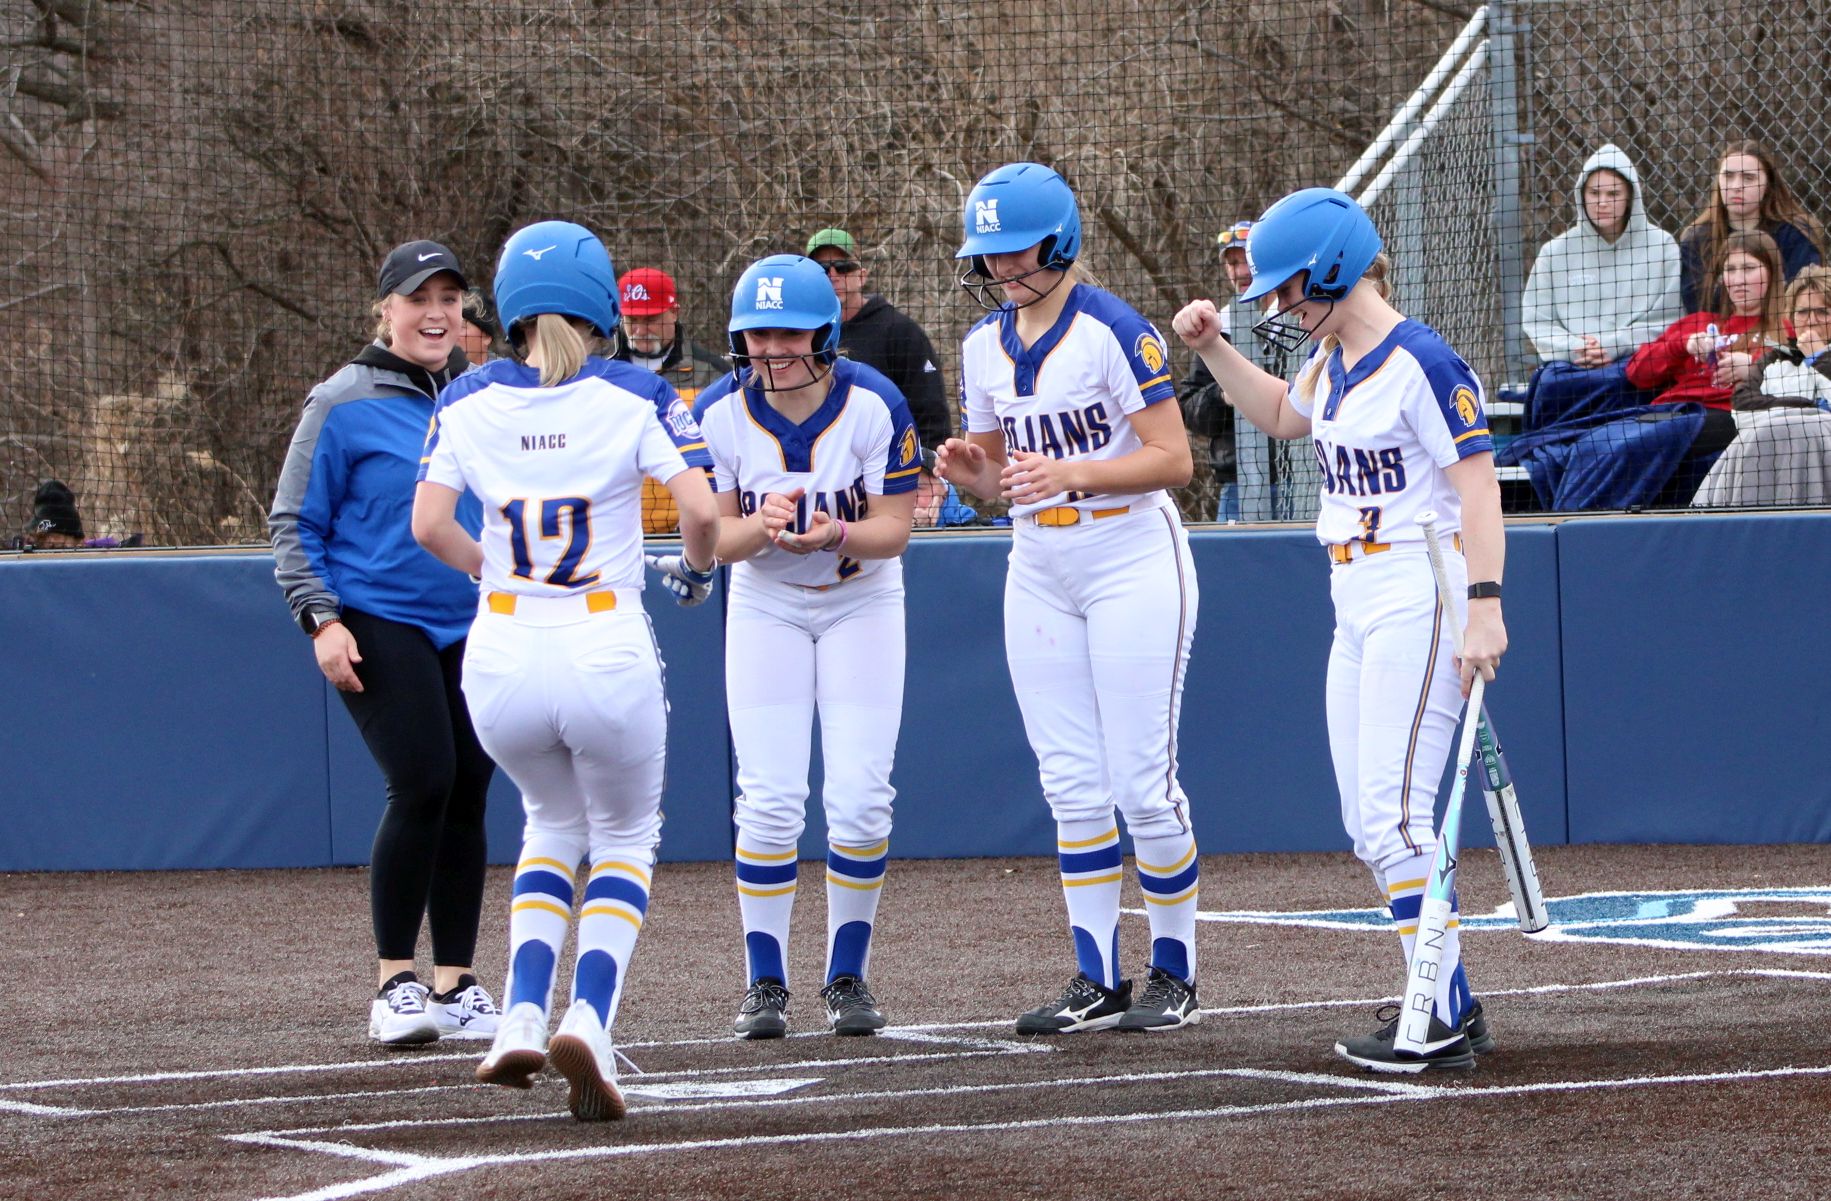 Brynnlin Kroymann (12) crosses home plate after hitting a 3-run home run in Sunday's second game of a doubleheader at Iowa Western.